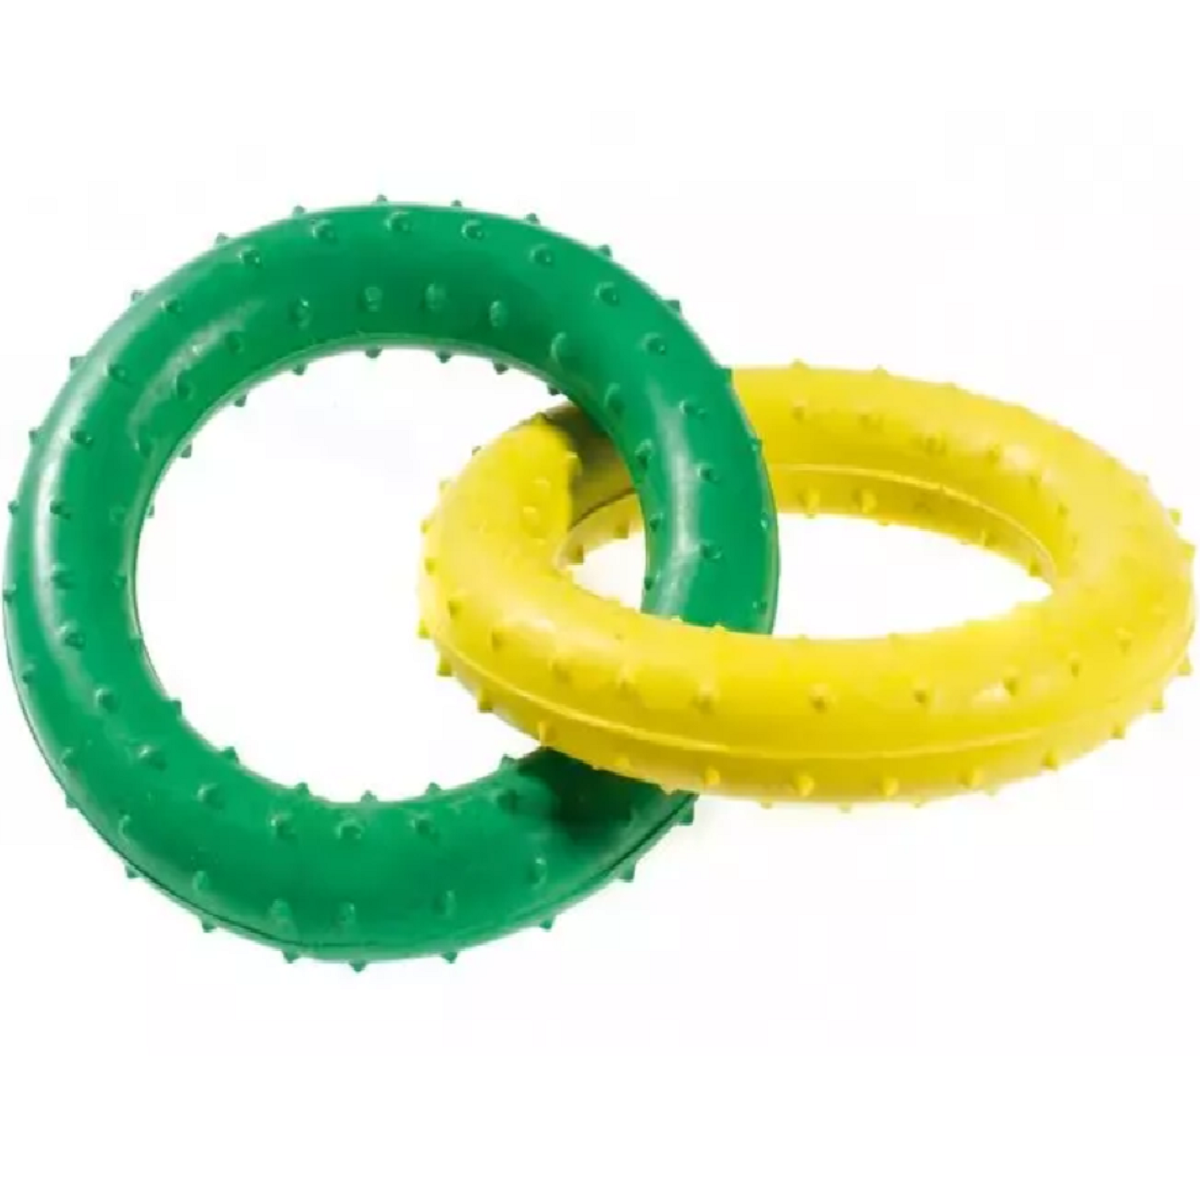 CLASSIC - Pimple Rubber Rings